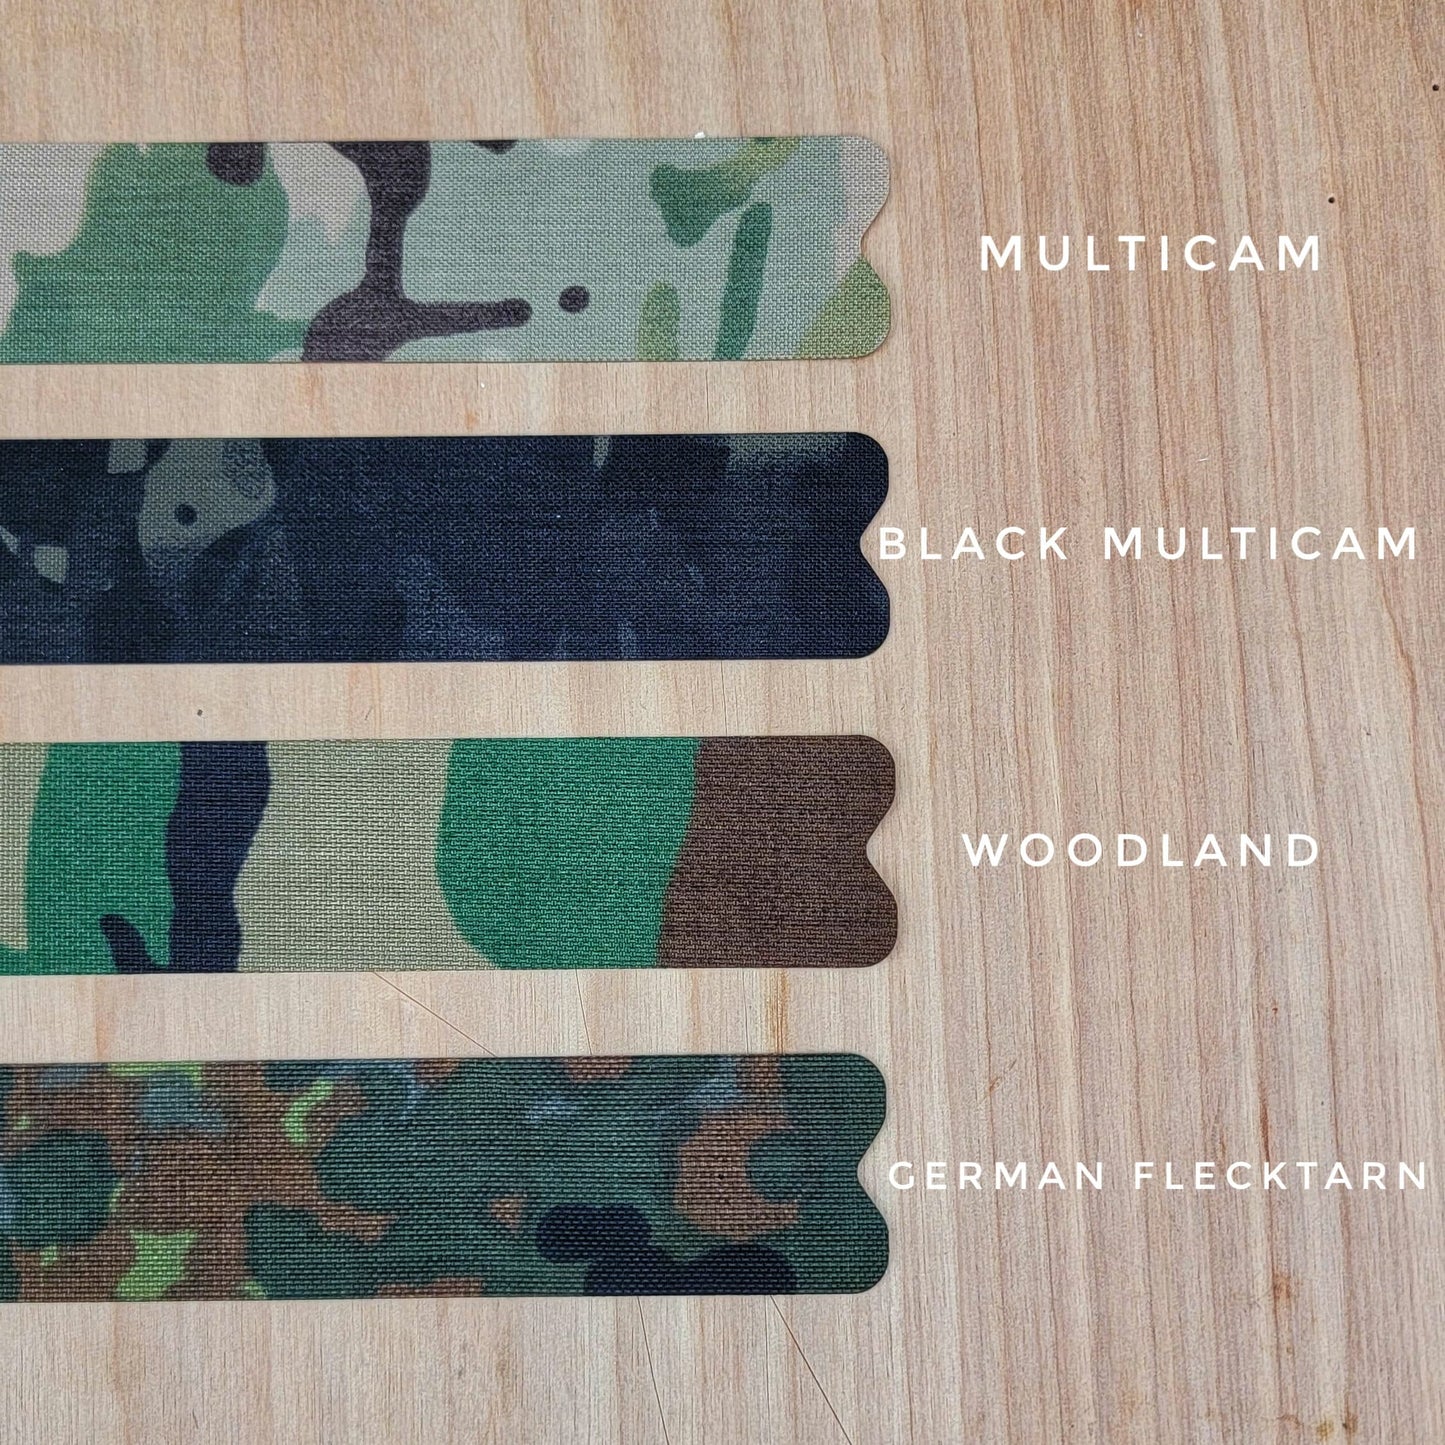 Tact-Wrap airsoft stickers, Cordura cheek rest for Magpul UBR 2.0 stock, tactical, camo, multicam, holster wrap, decal